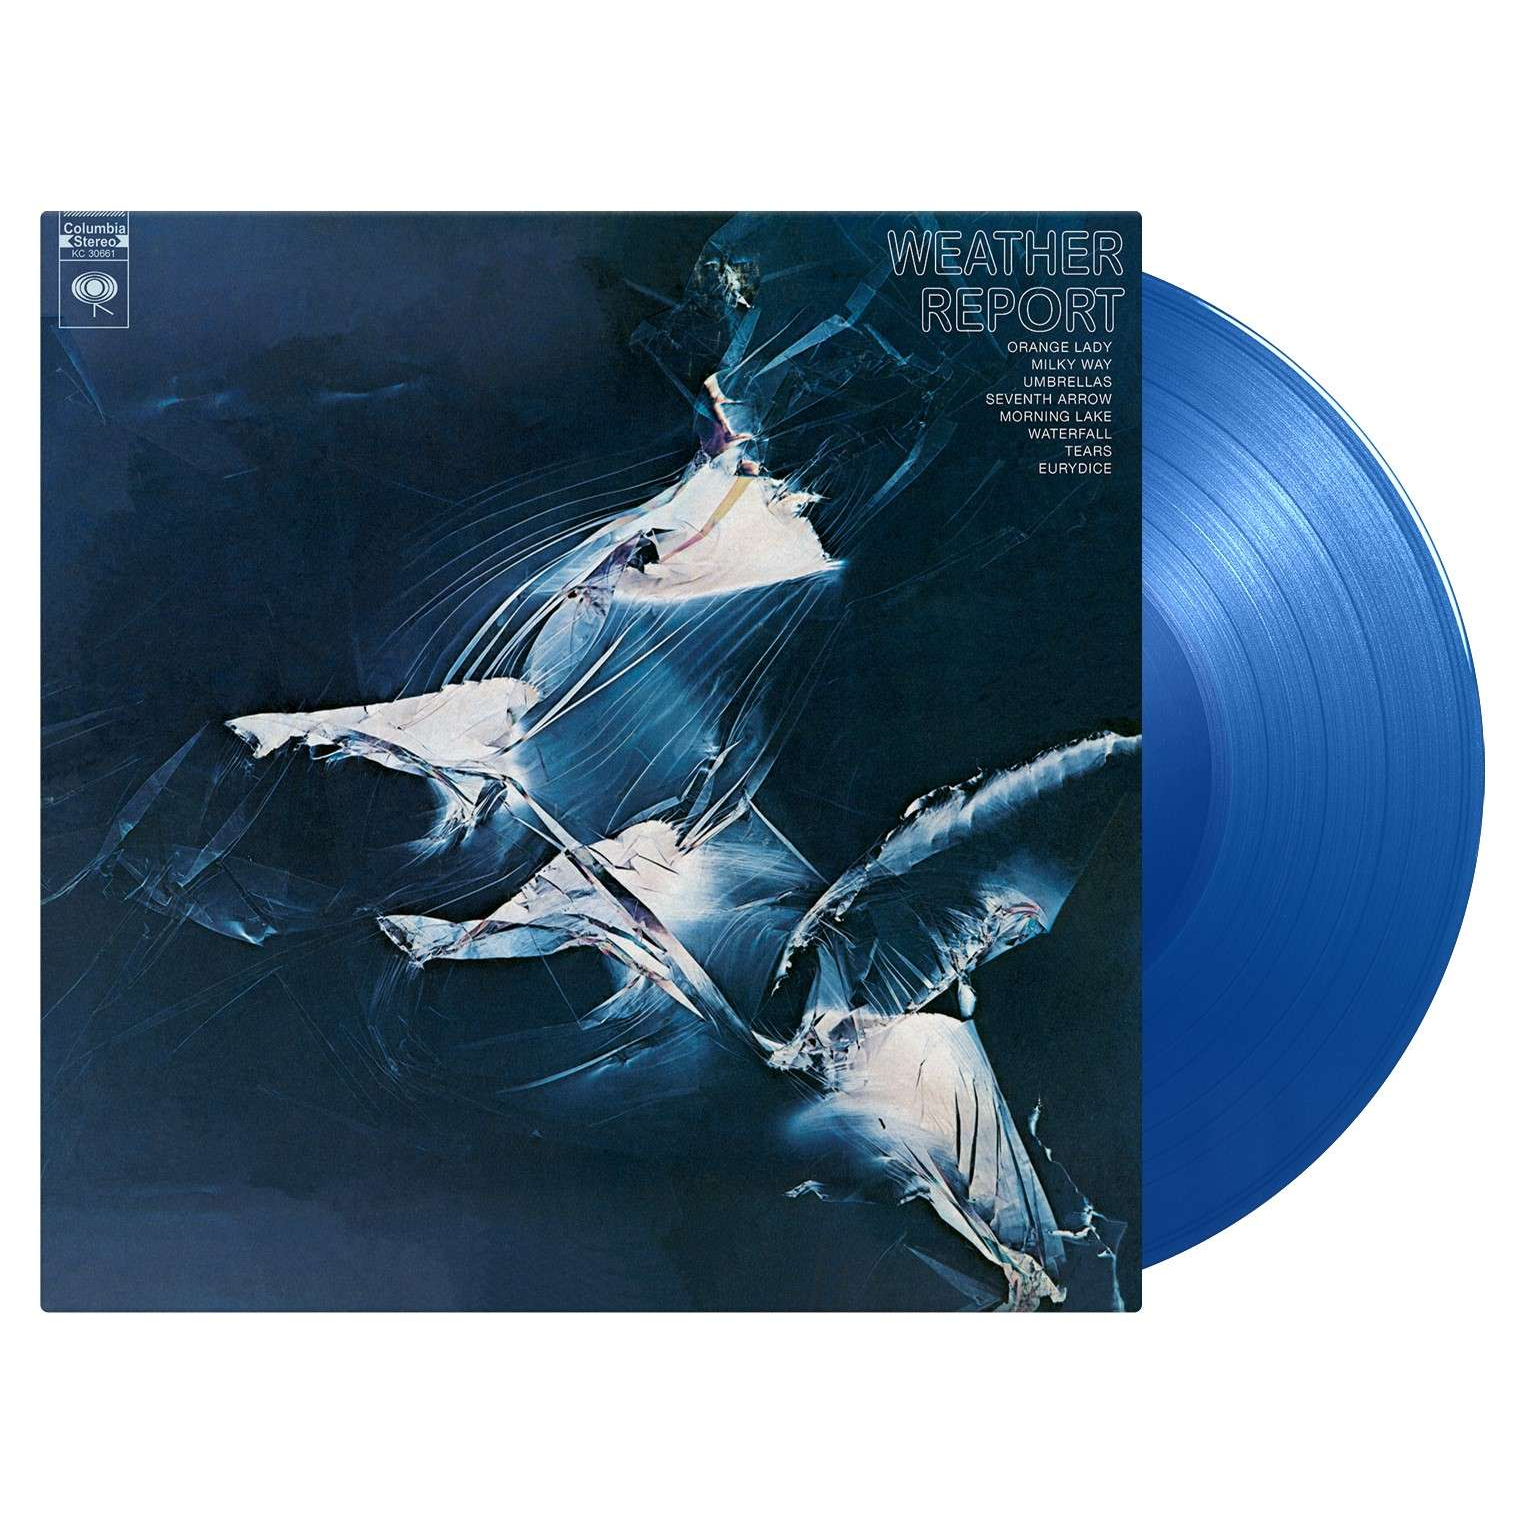 WEATHER REPORT -COLOURED-180GR./1971 DEBUT/1500 COPIES ON BLUE COLOURED VINYL